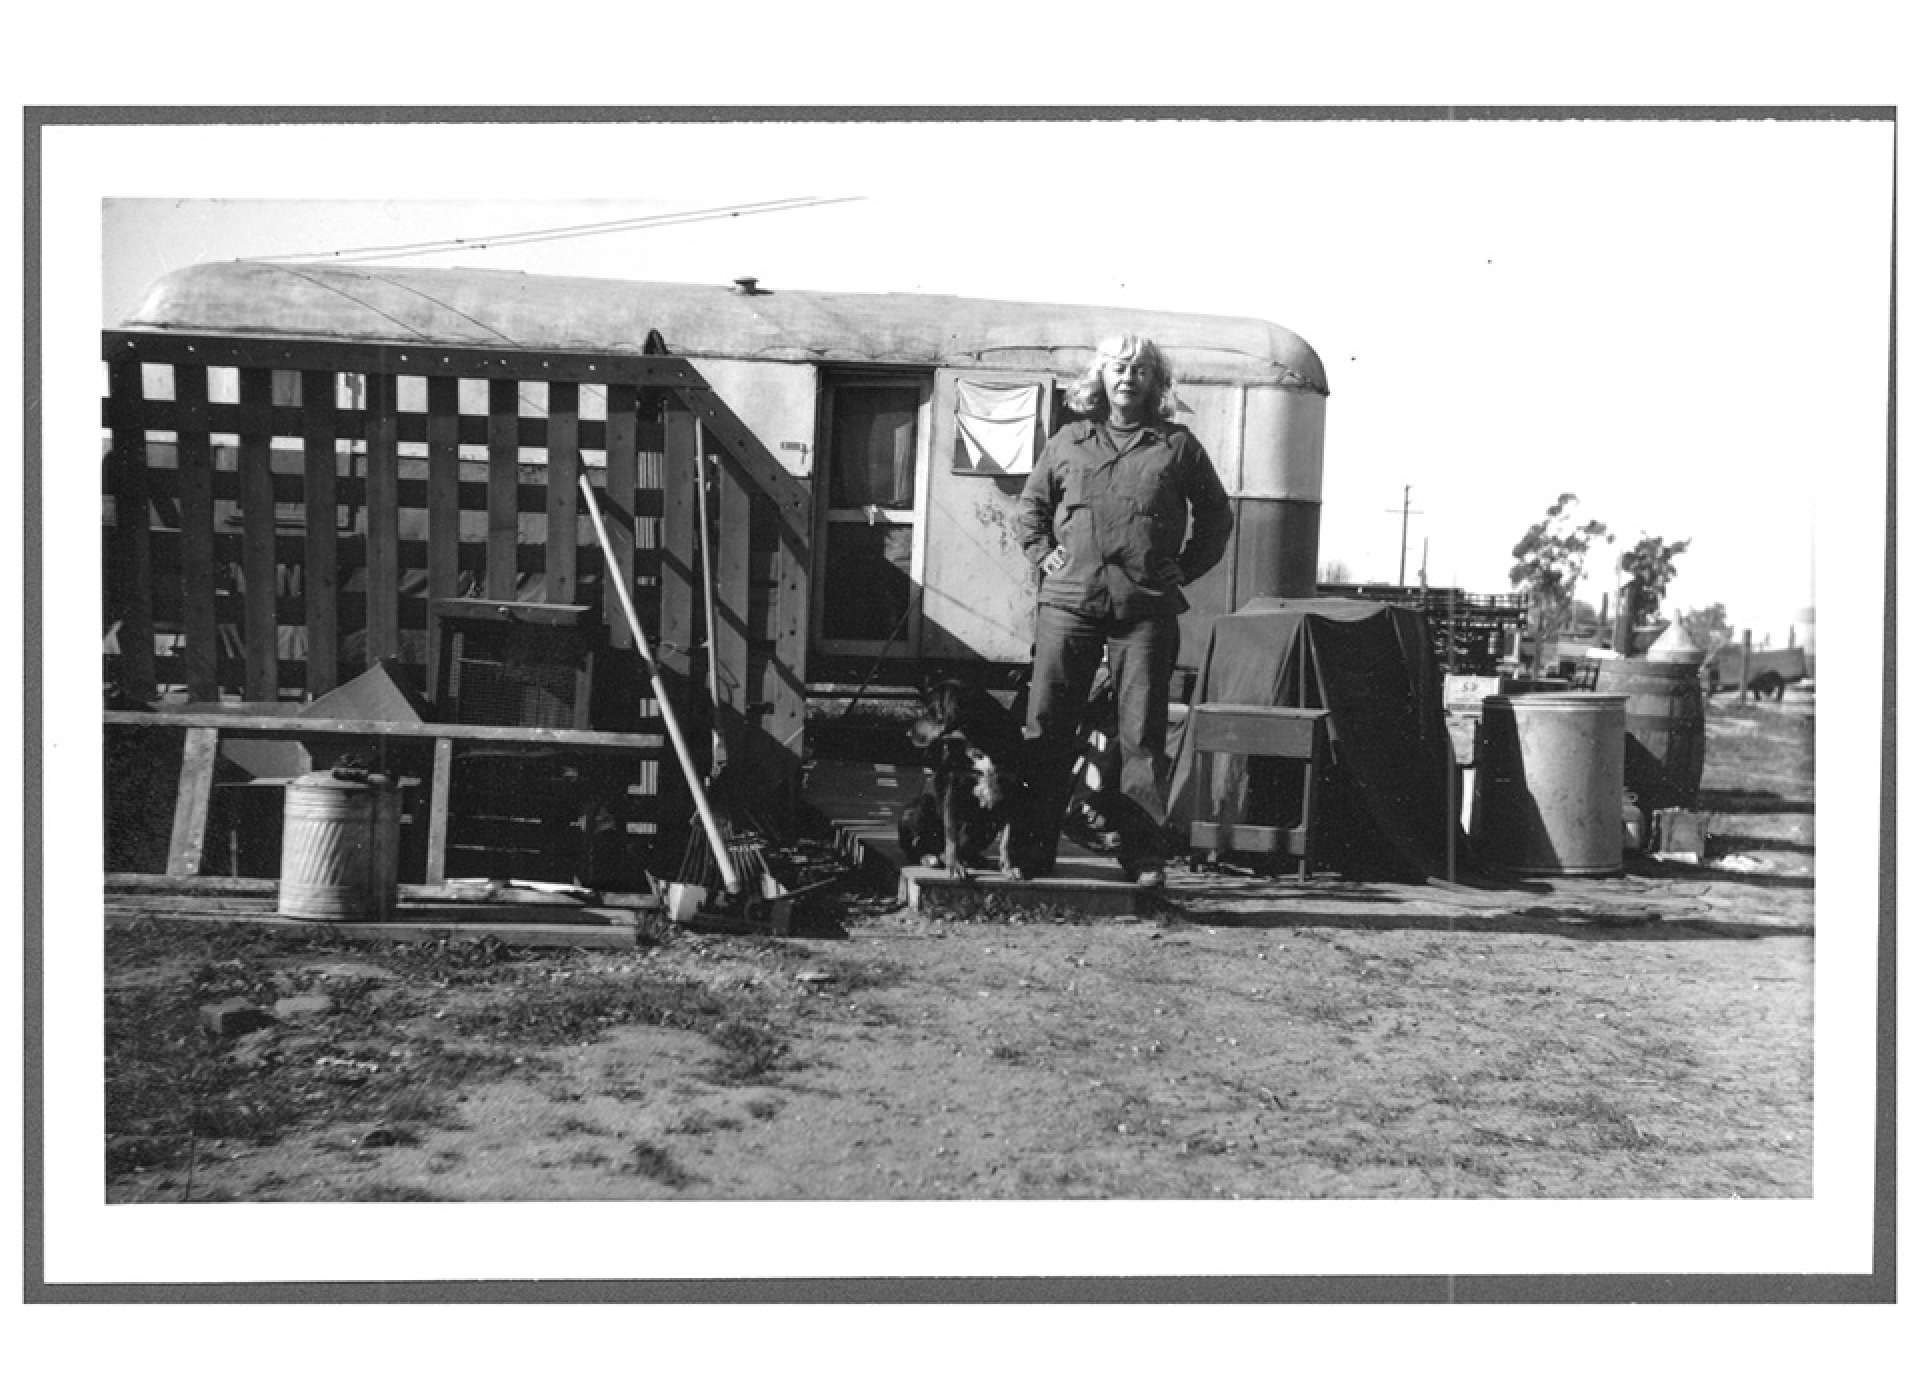 Estelle Ishigo stands in front of the trailer she shared with Arthur at the Cal Sea Food Labor Camp in Harbor City.